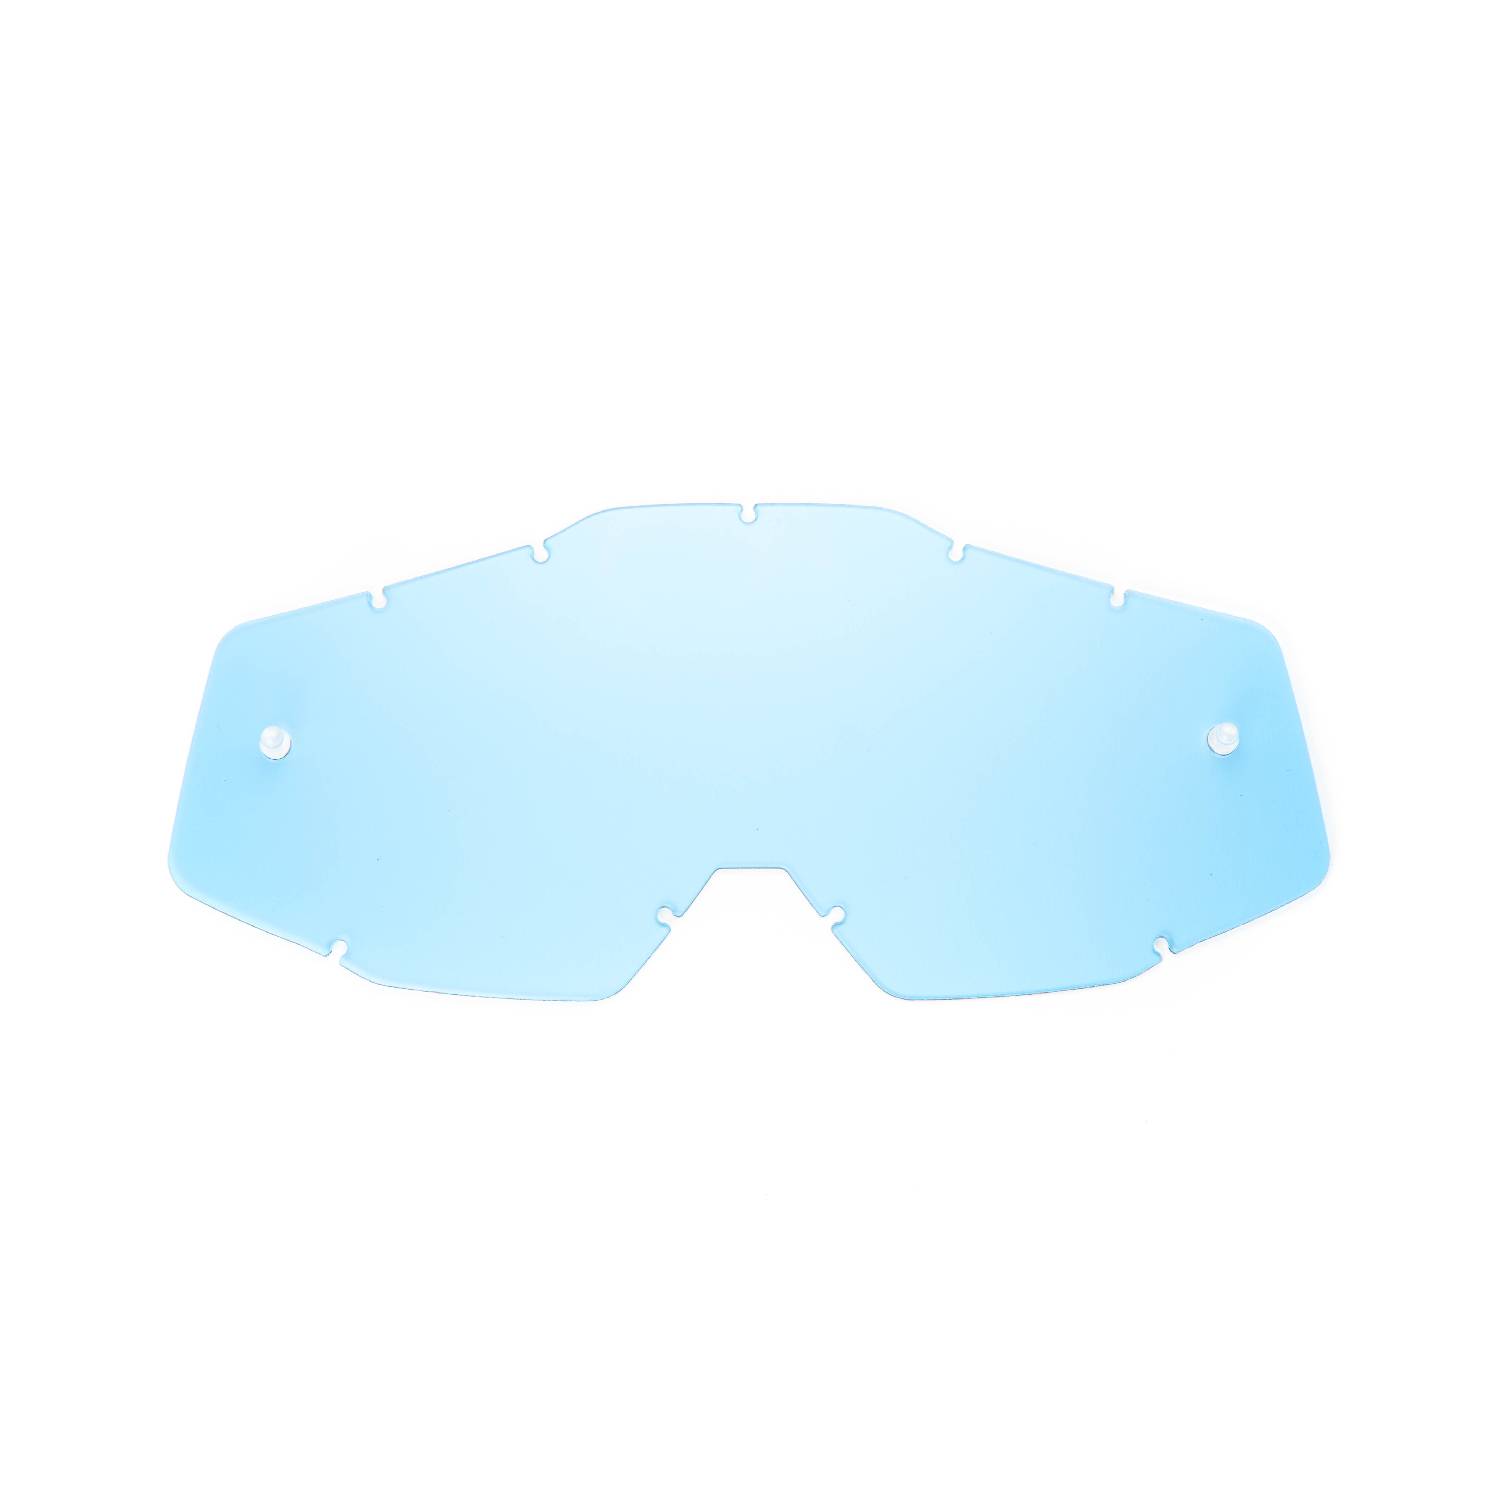 blue replacement lenses for goggles compatible for 100% Racecraft / Strata / Accuri / Mercury goggle